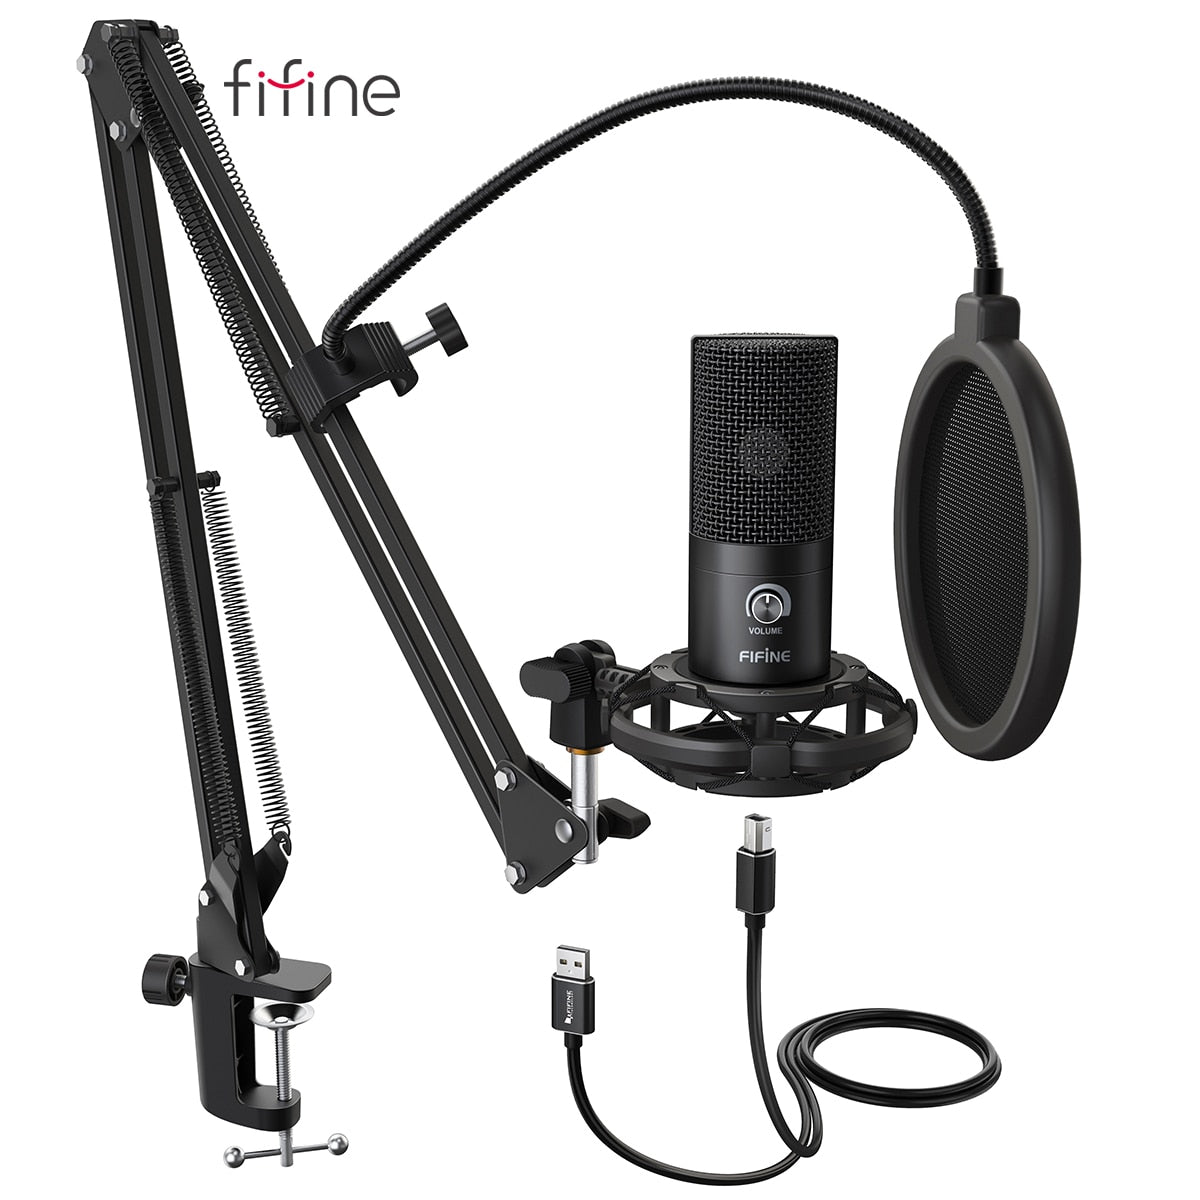 FIFINE Studio Condenser USB Computer Microphone Kit With Adjustable Scissor Arm Stand Shock Mount for YouTube Voice Overs-T669.